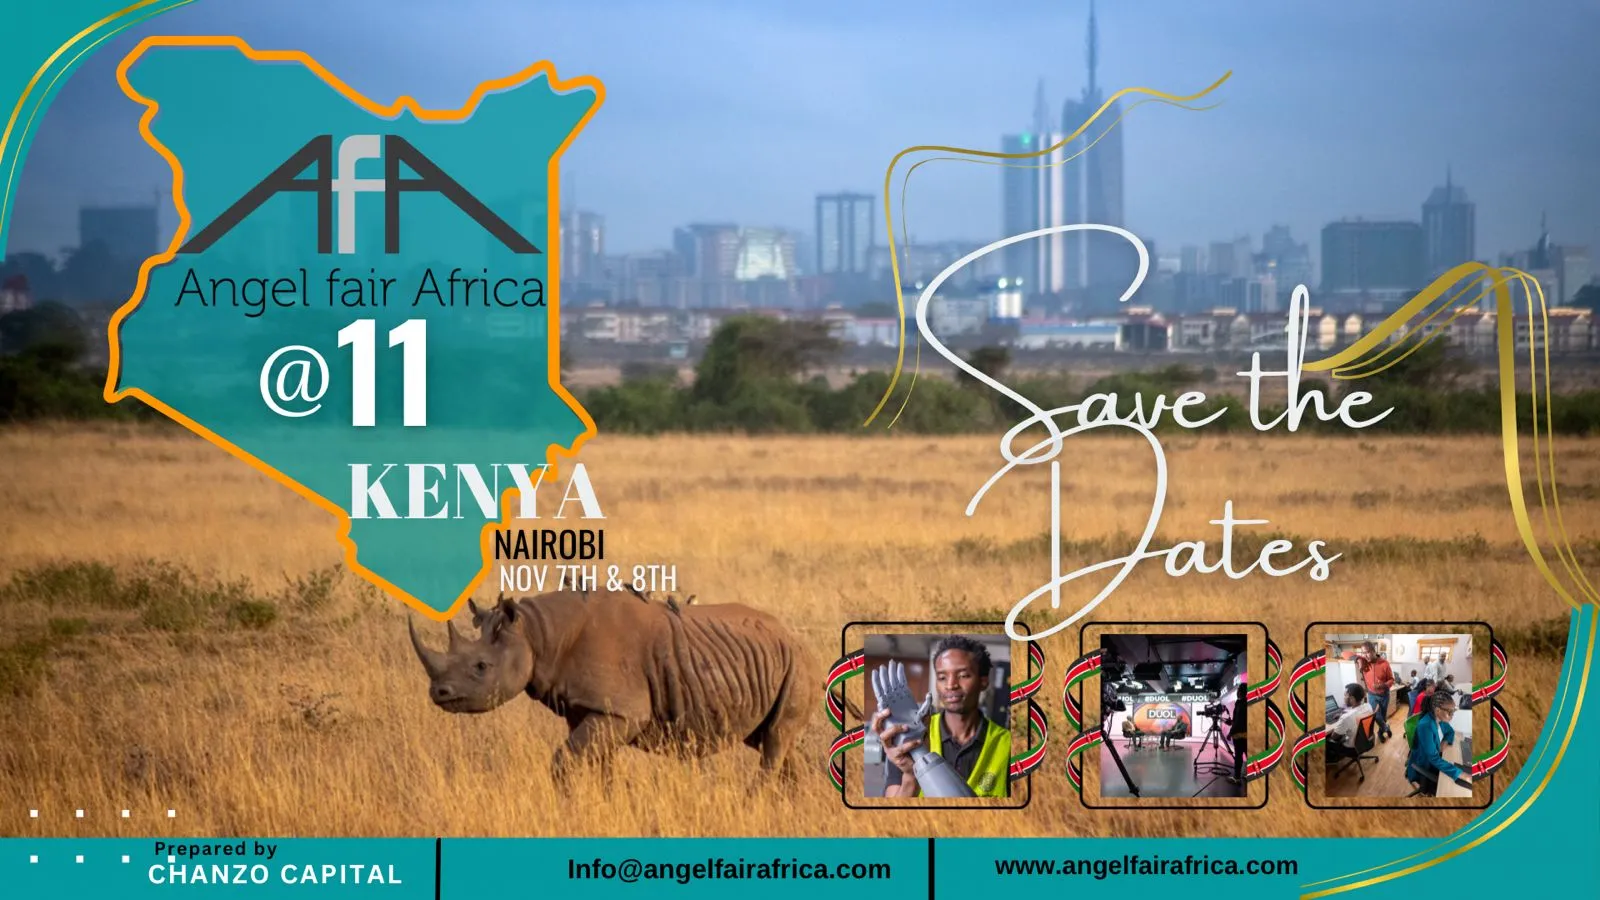 11th Angel Fair Africa to take place in Kenya